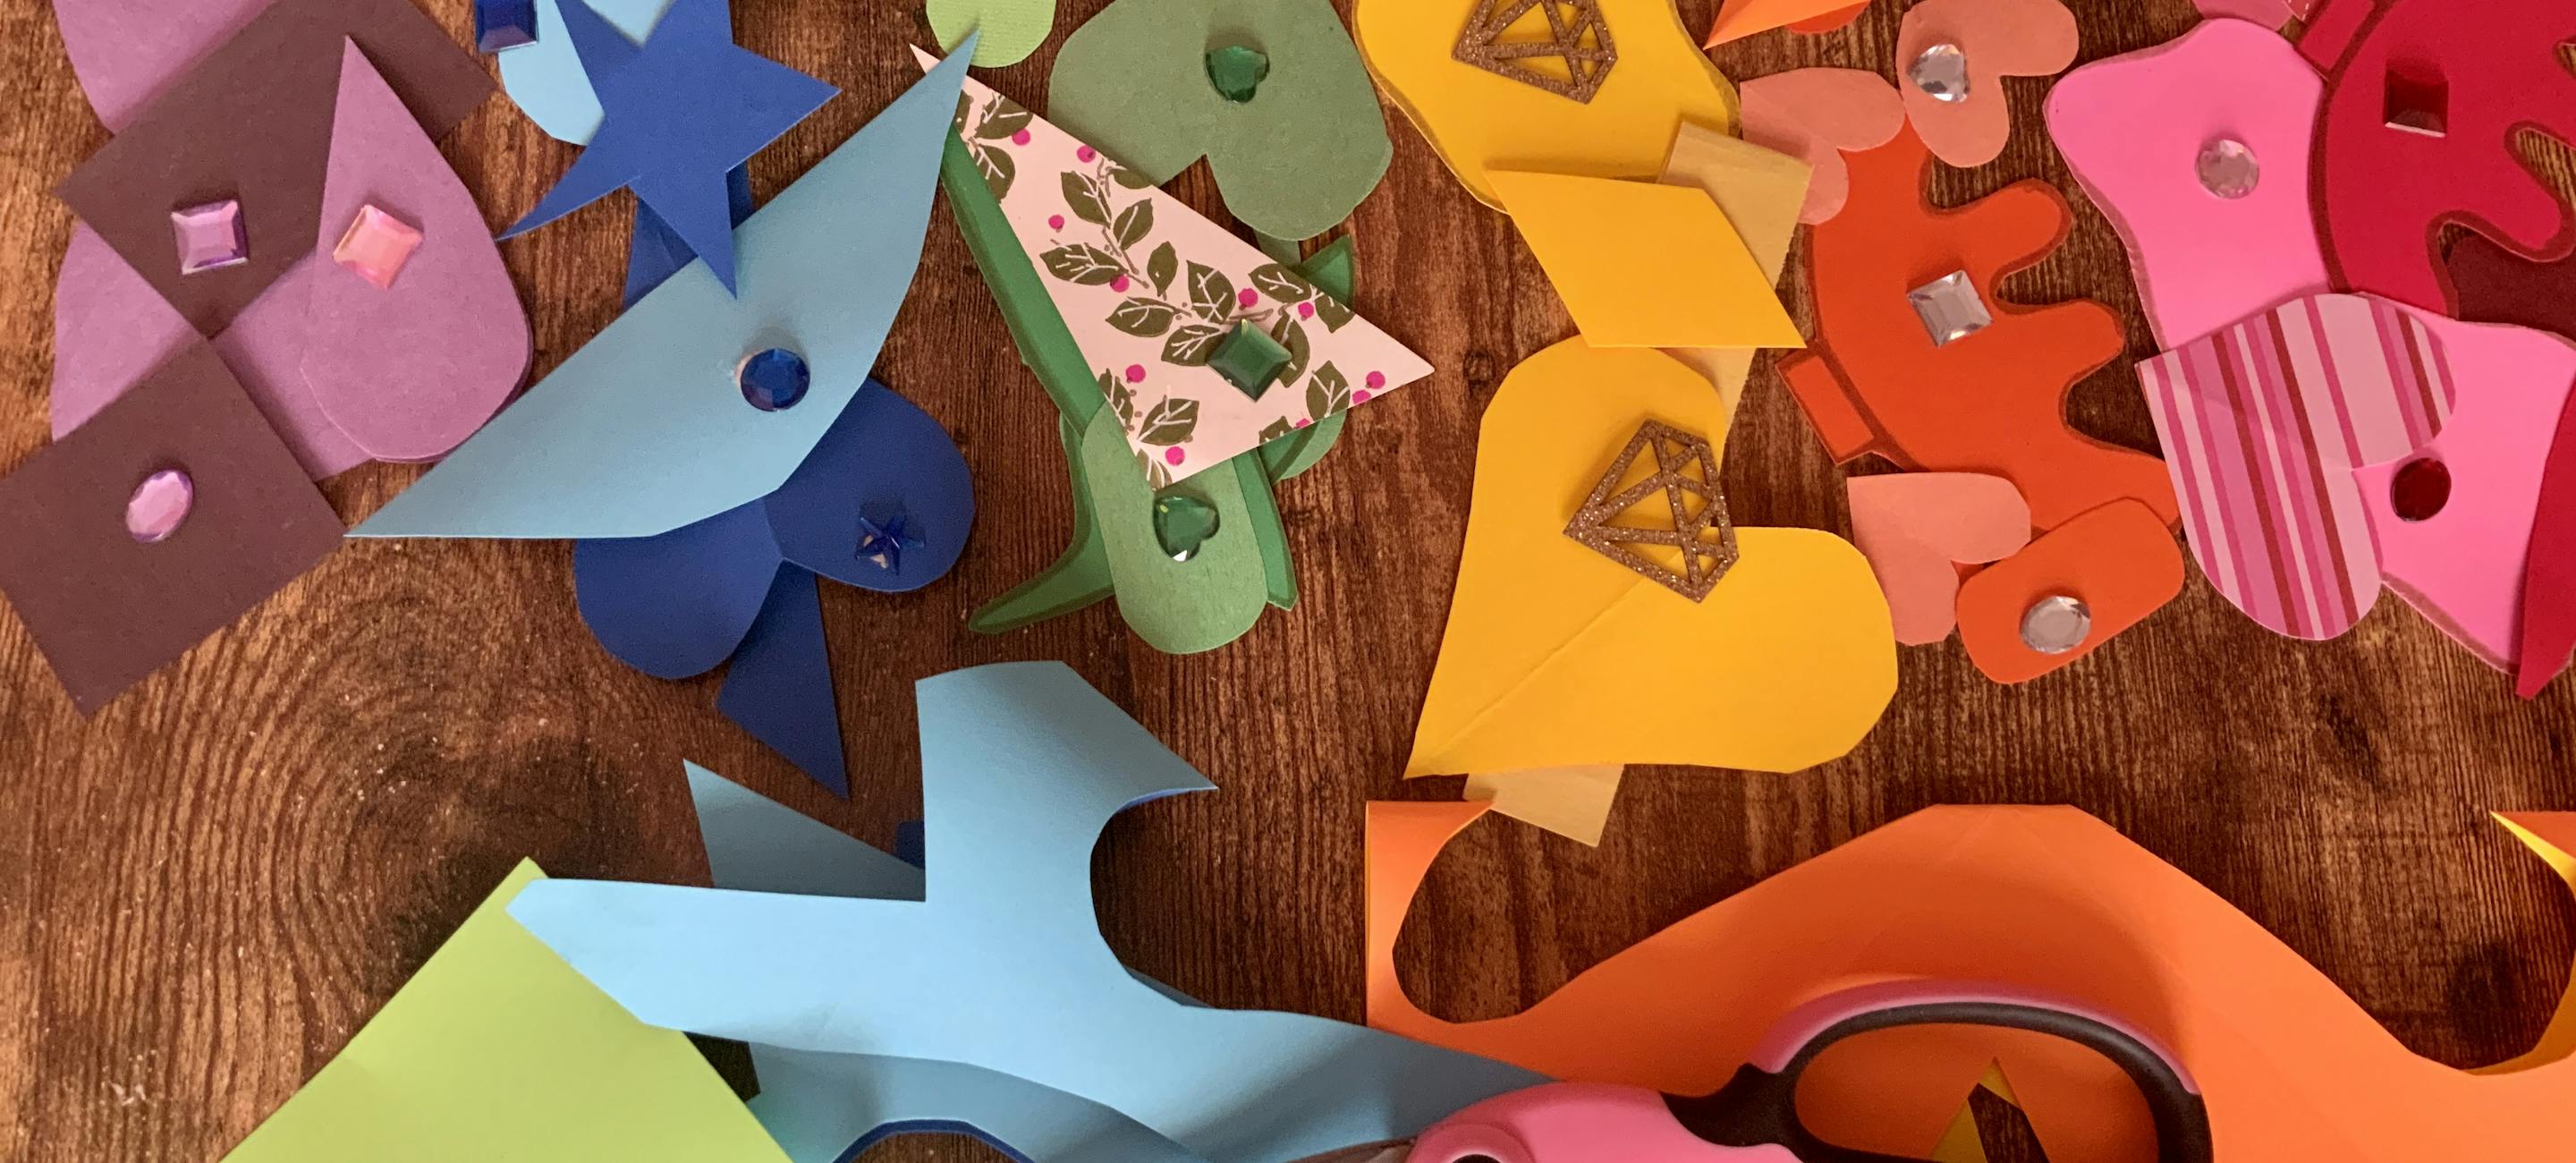 colorful shapes cut out and laid on a table with a pair of scissors nearby